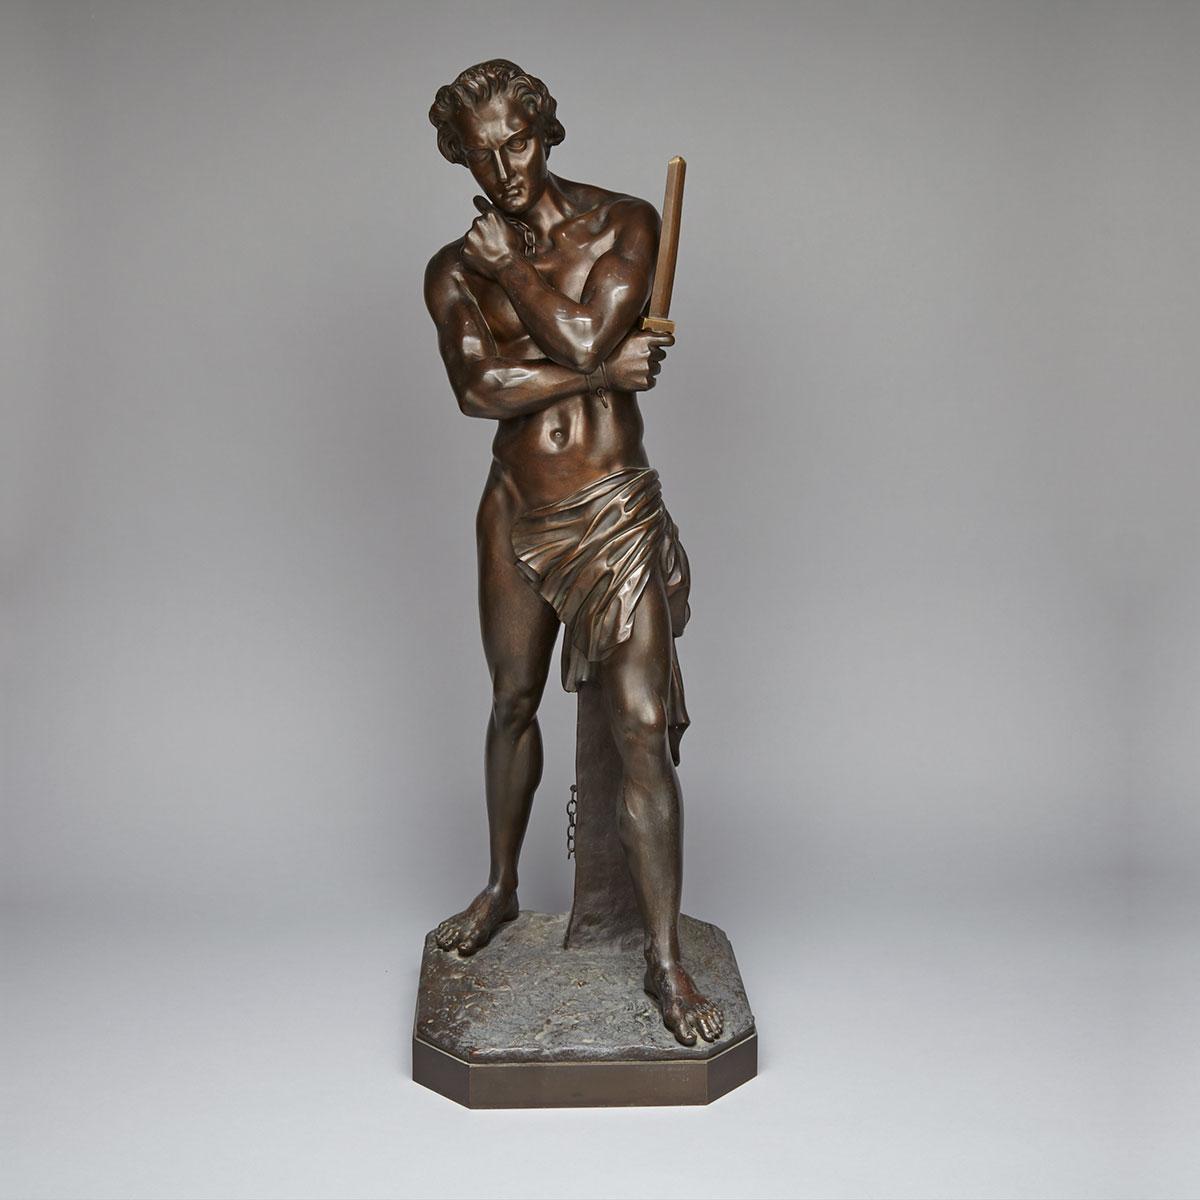 French School Patinated Bronze Figure of a Freed Gladiator, 19th century